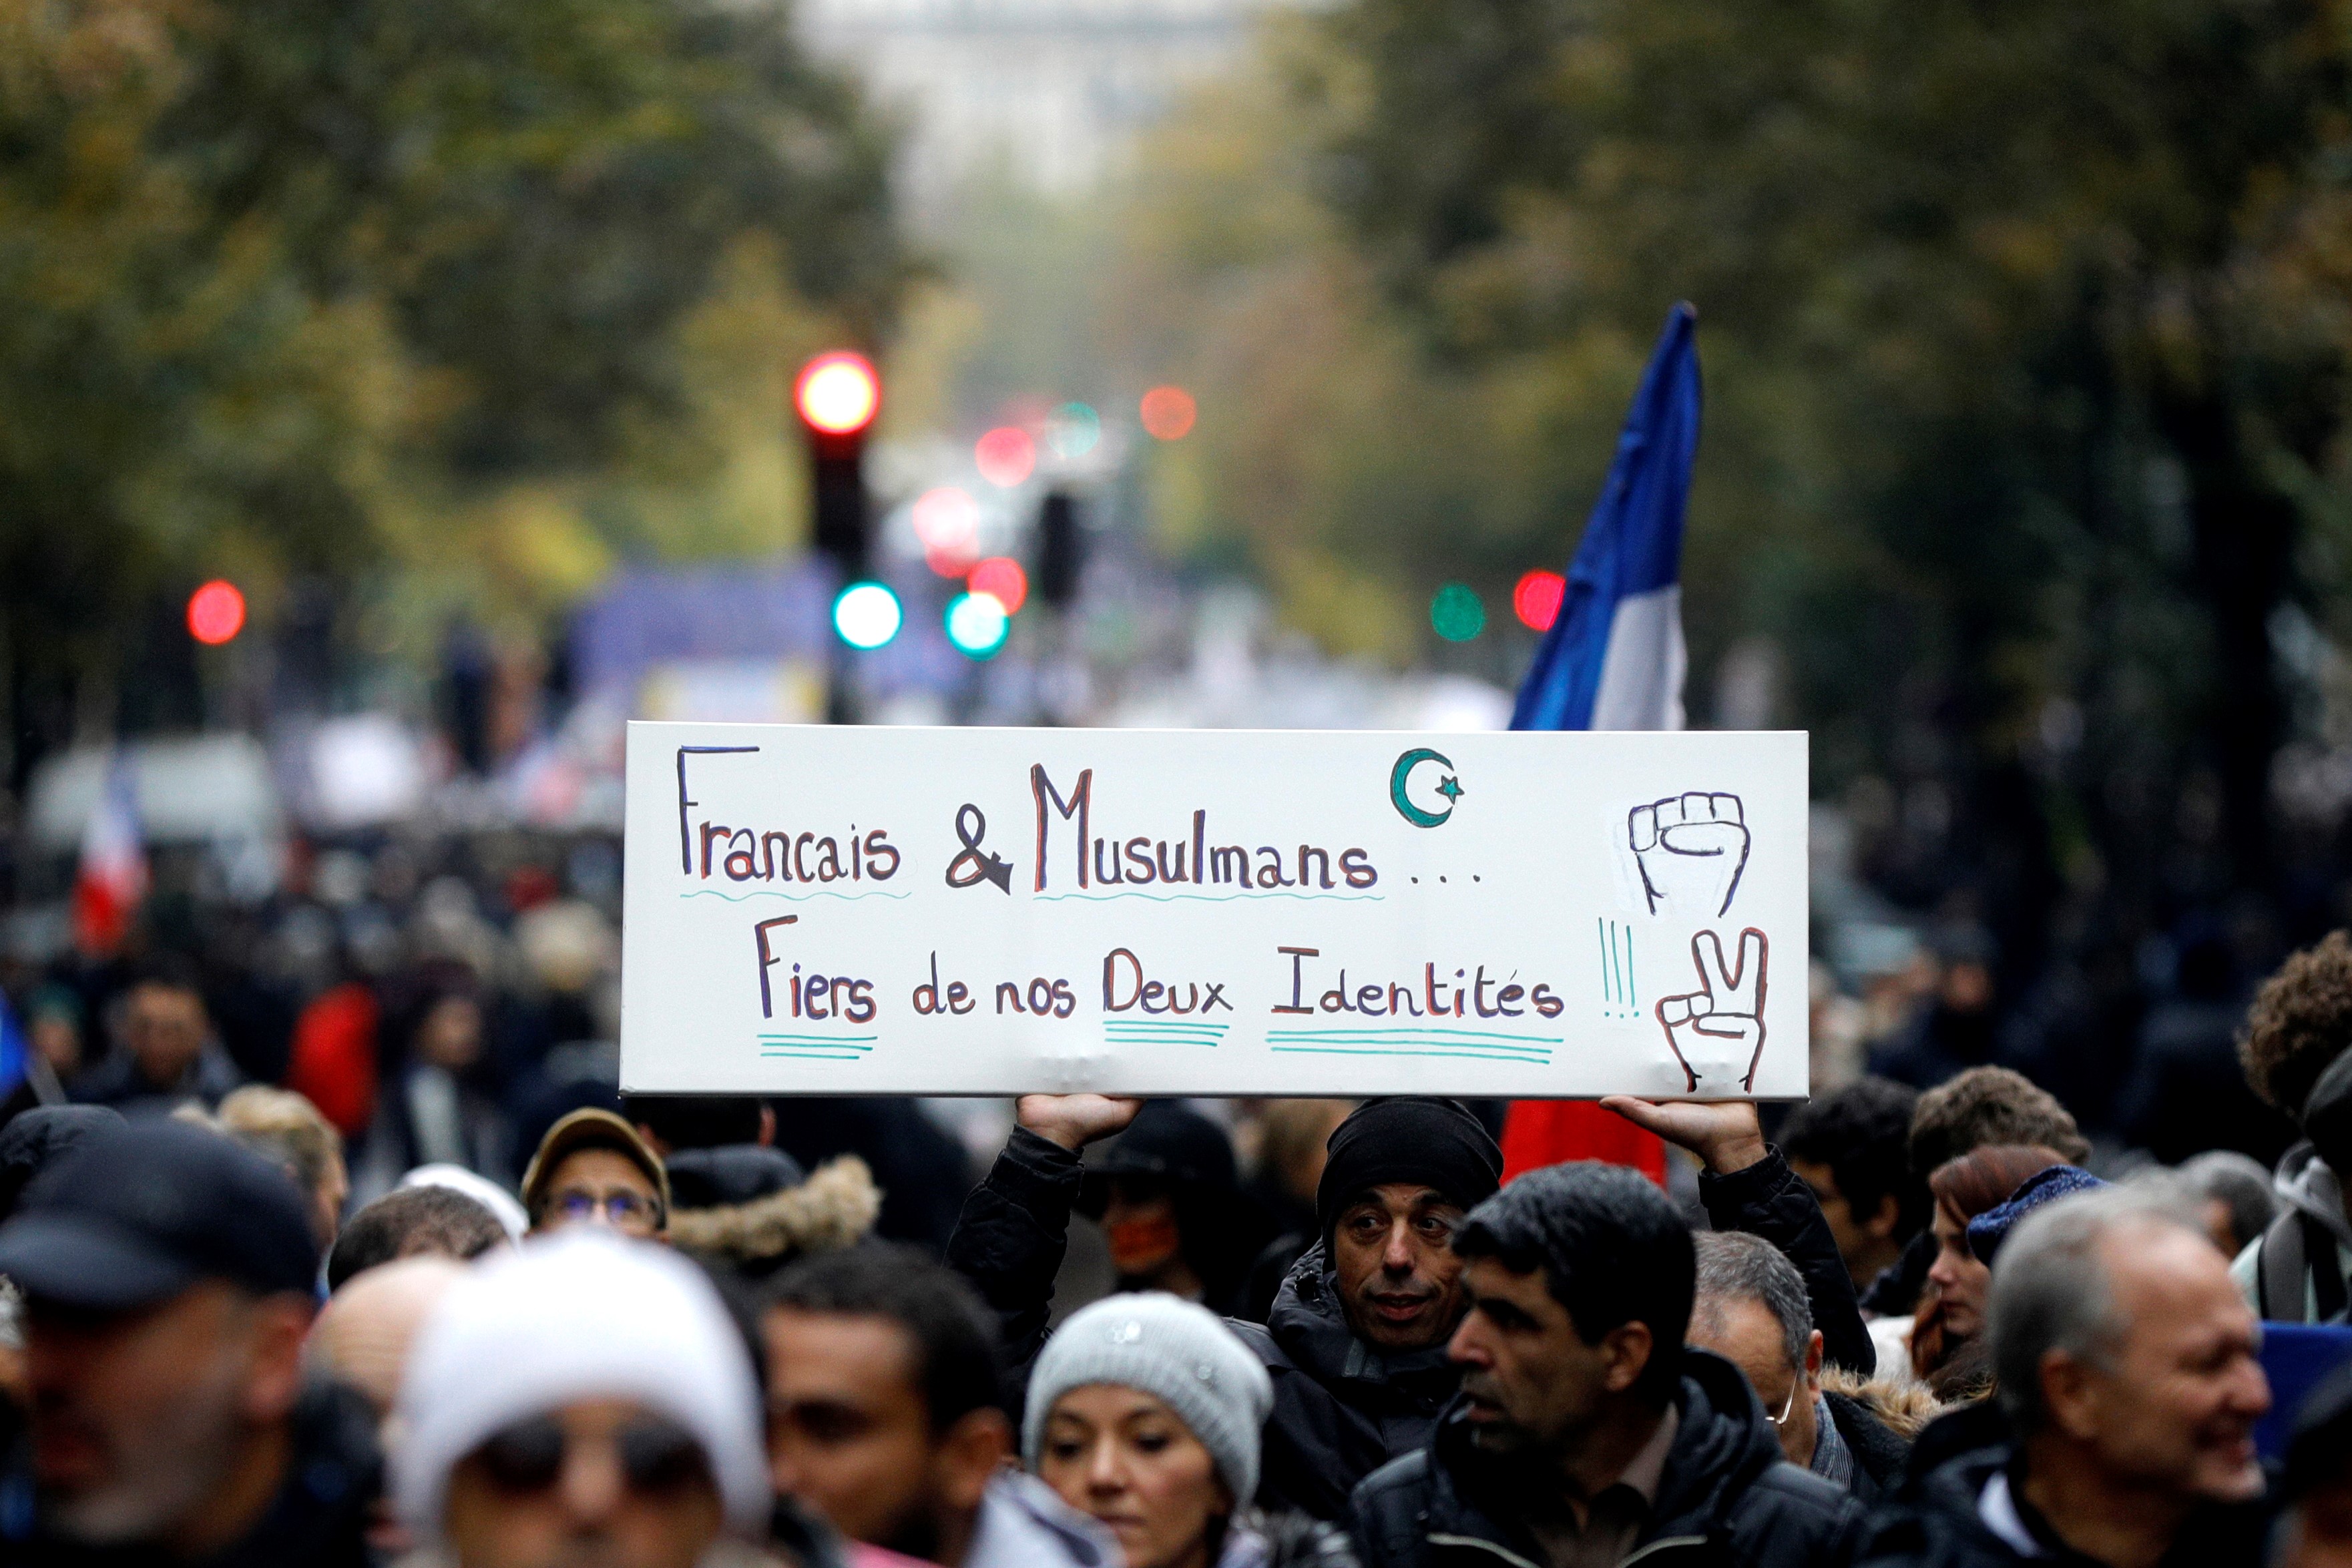 Protesters hold a placard reading "French and muslims, proud of our identities" as they march in Paris to protest against Islamophobia, on November 10, 2019.